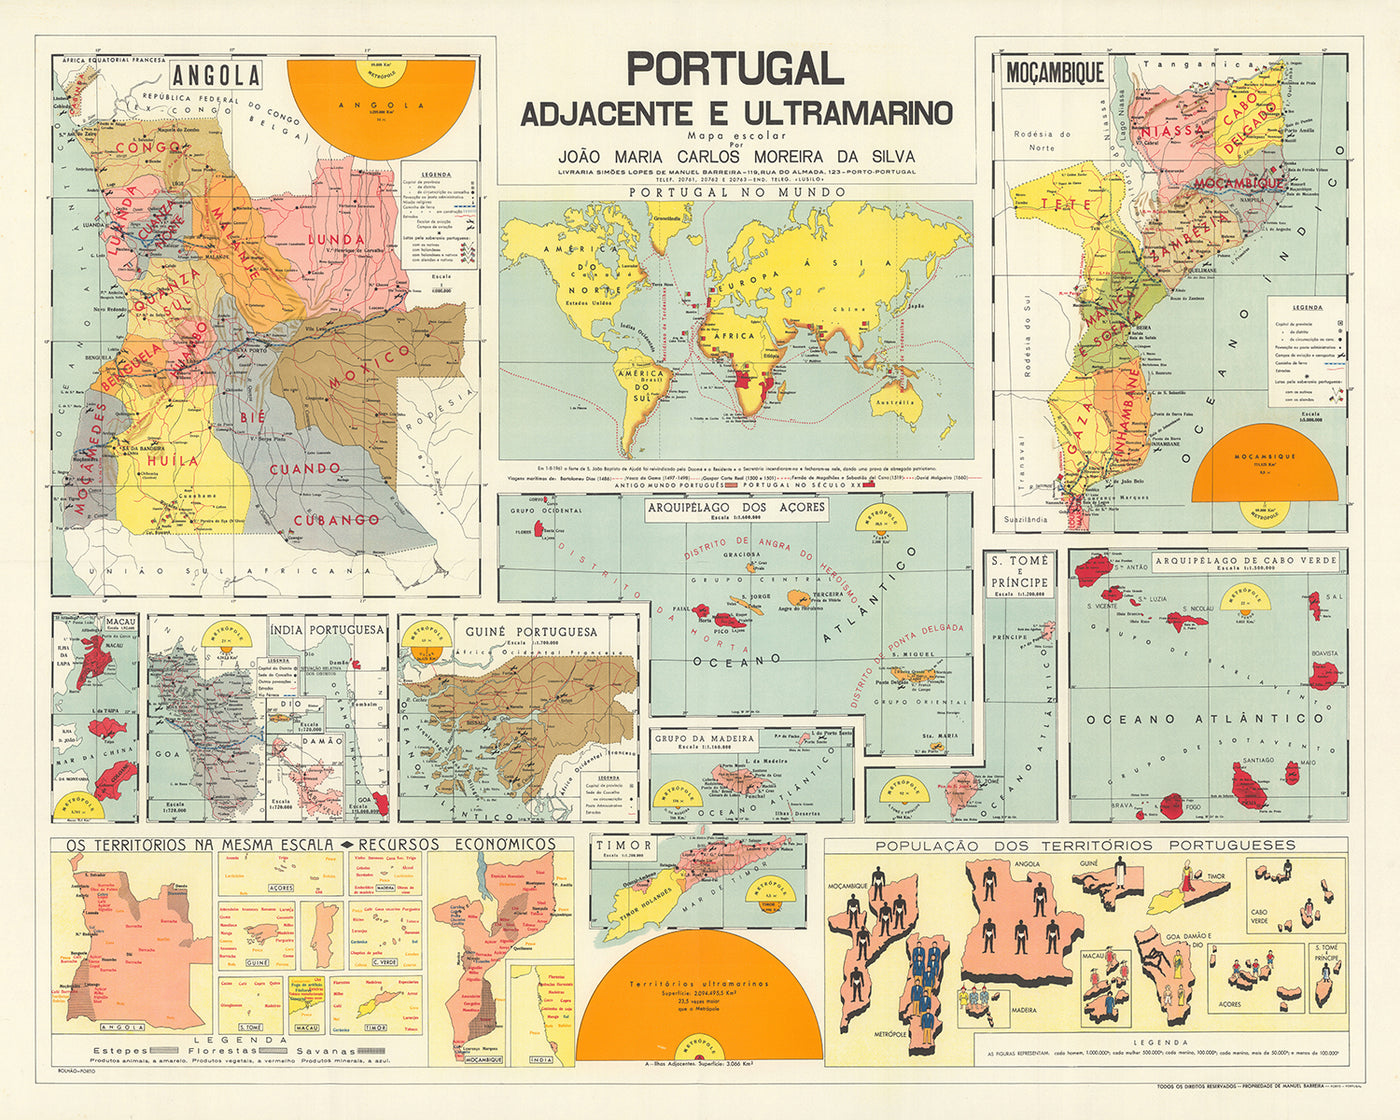 Old World Map of the Portuguese Empire by Manuel Barreira, 1961: Colonial Mozambique, Azores, Angola, Cape Verde, Macau, India